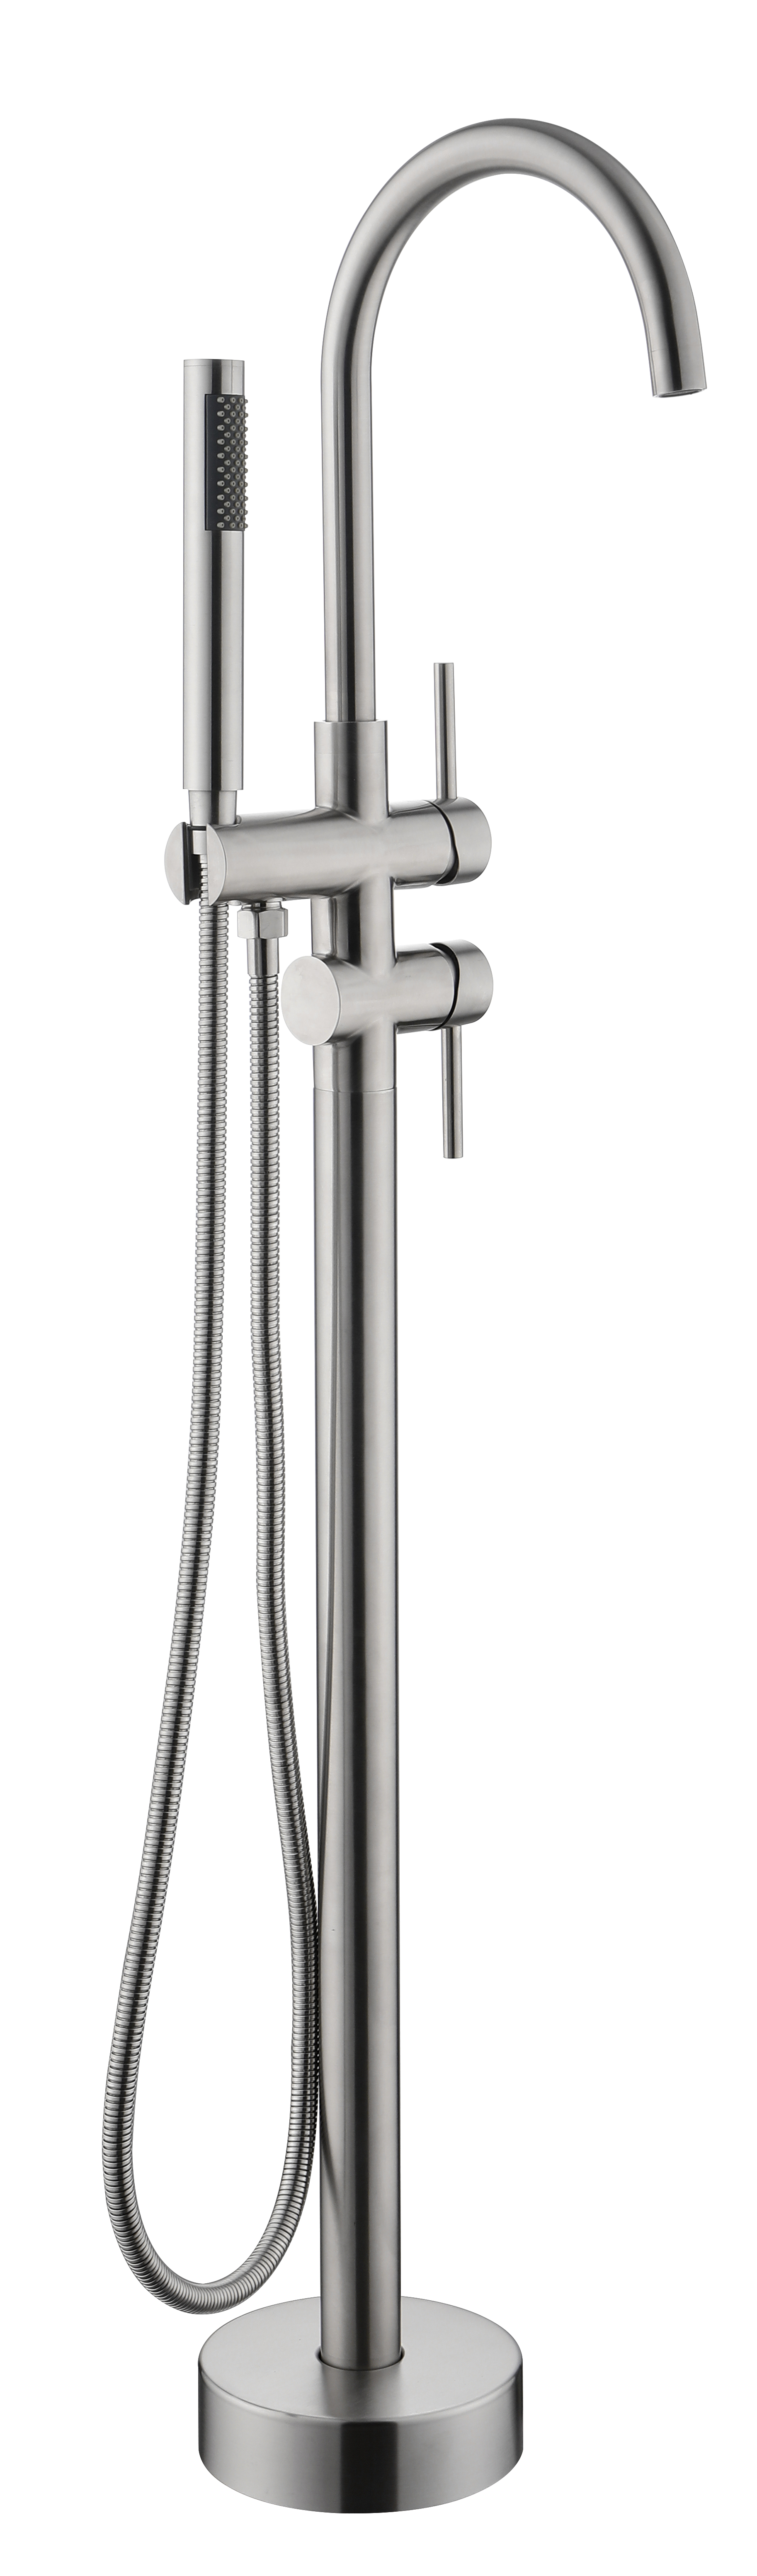 Mount Bathtub Faucet Freestanding Tub Filler Brushed Nickel Standing High Flow Shower Faucets with Handheld Shower Mixer Taps Swivel Spout-CASAINC